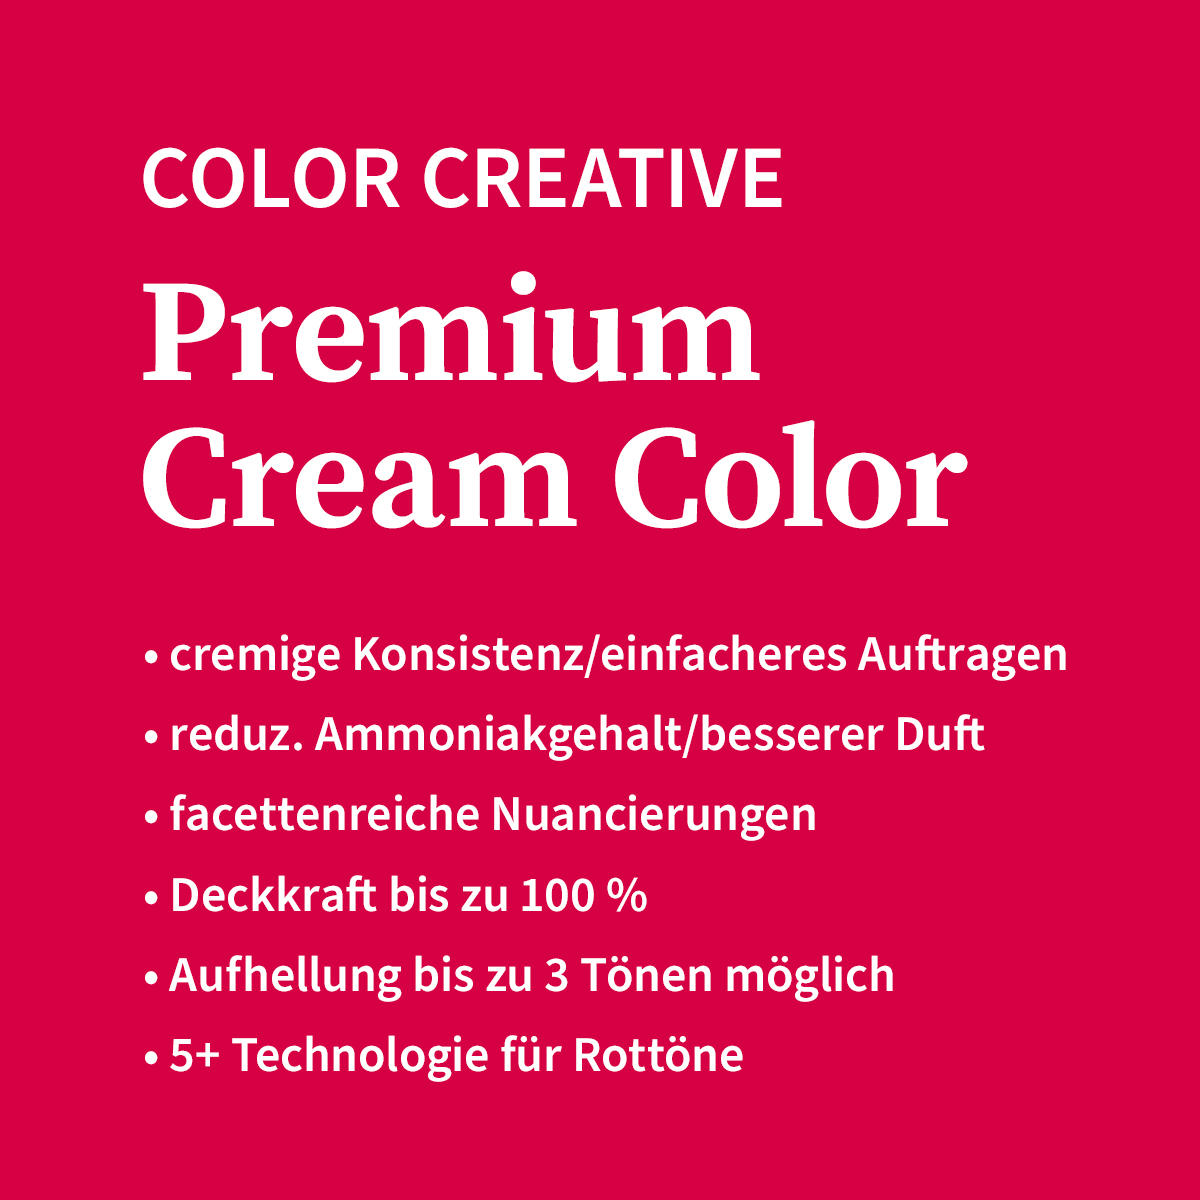 Basler Color Creative Premium Cream Color 5/4 light brown red - mahogany red, tube 60 ml - 4